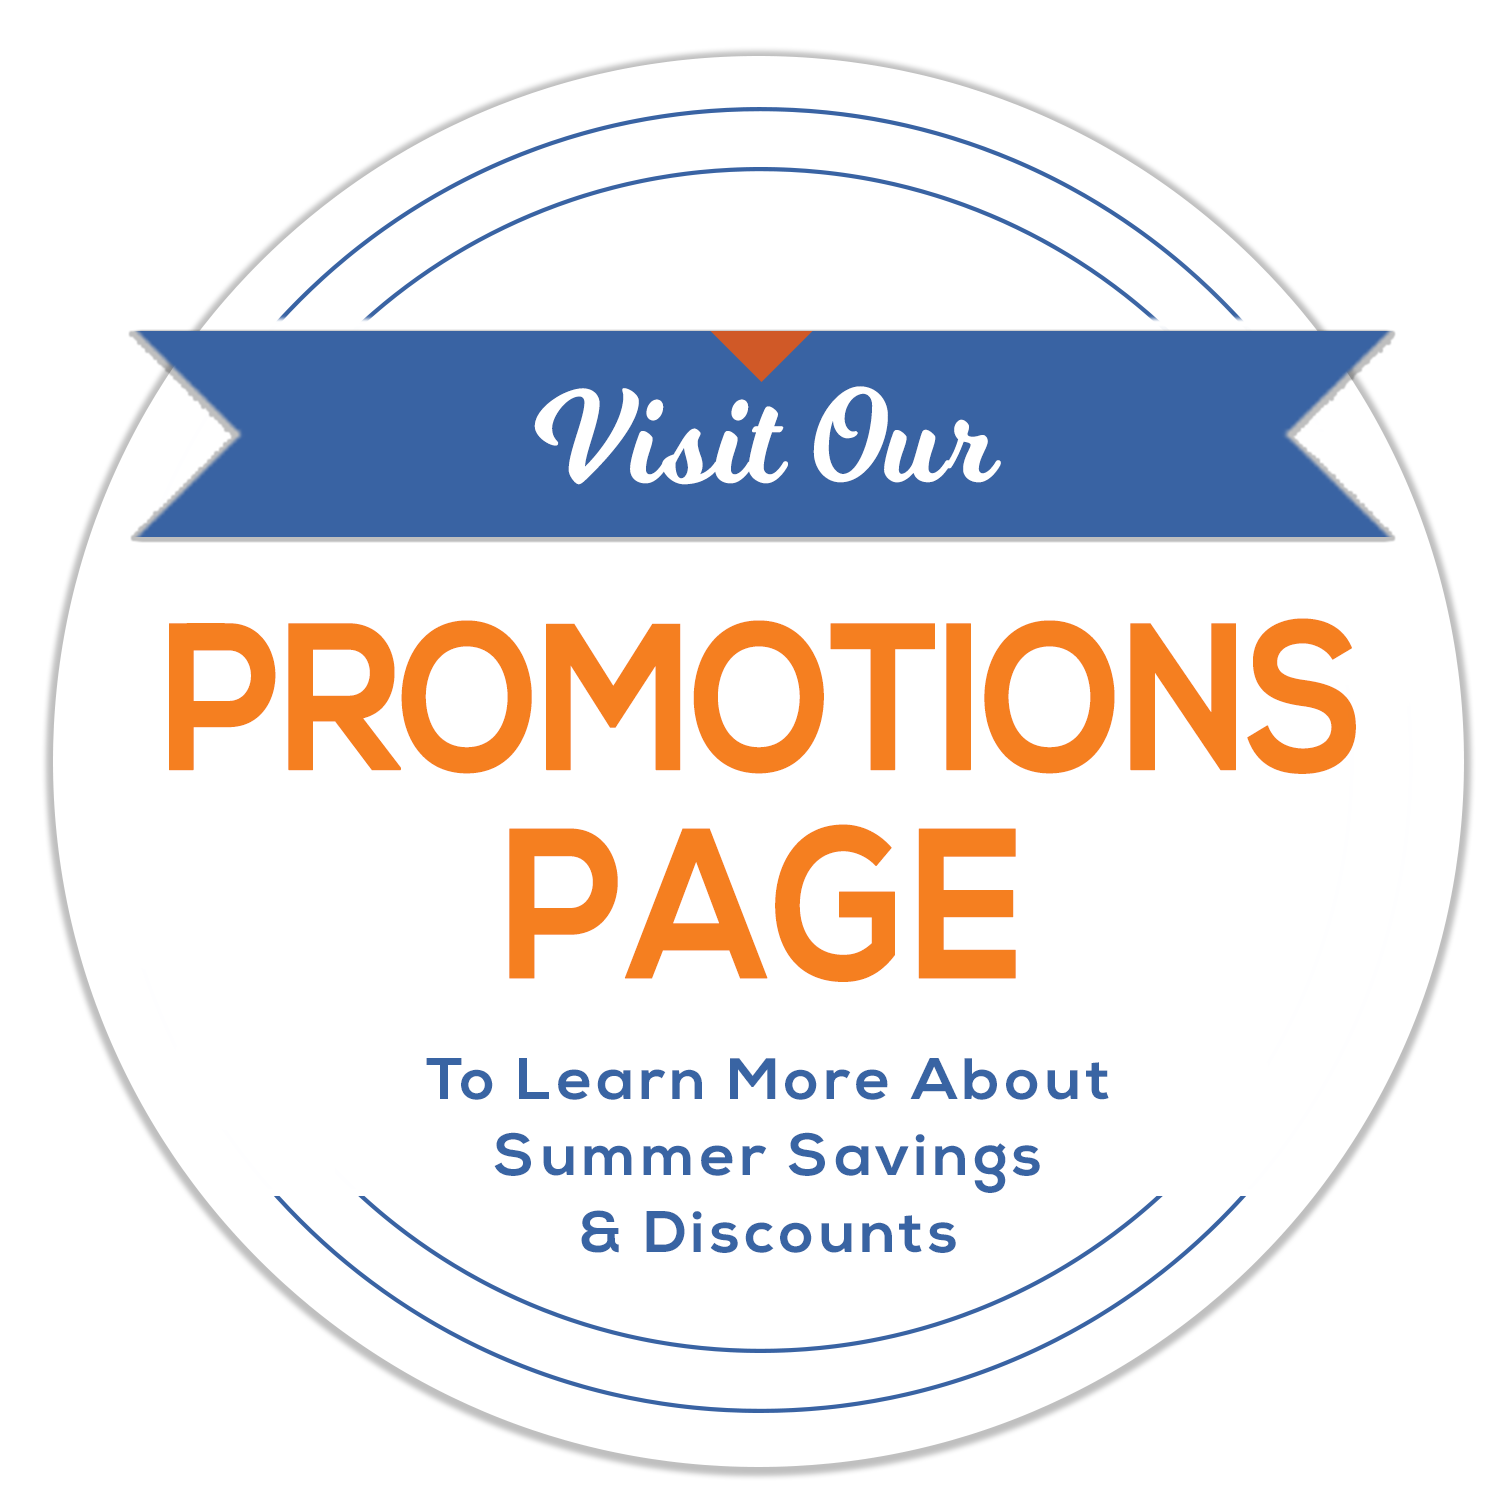 Visit our Promotions page!